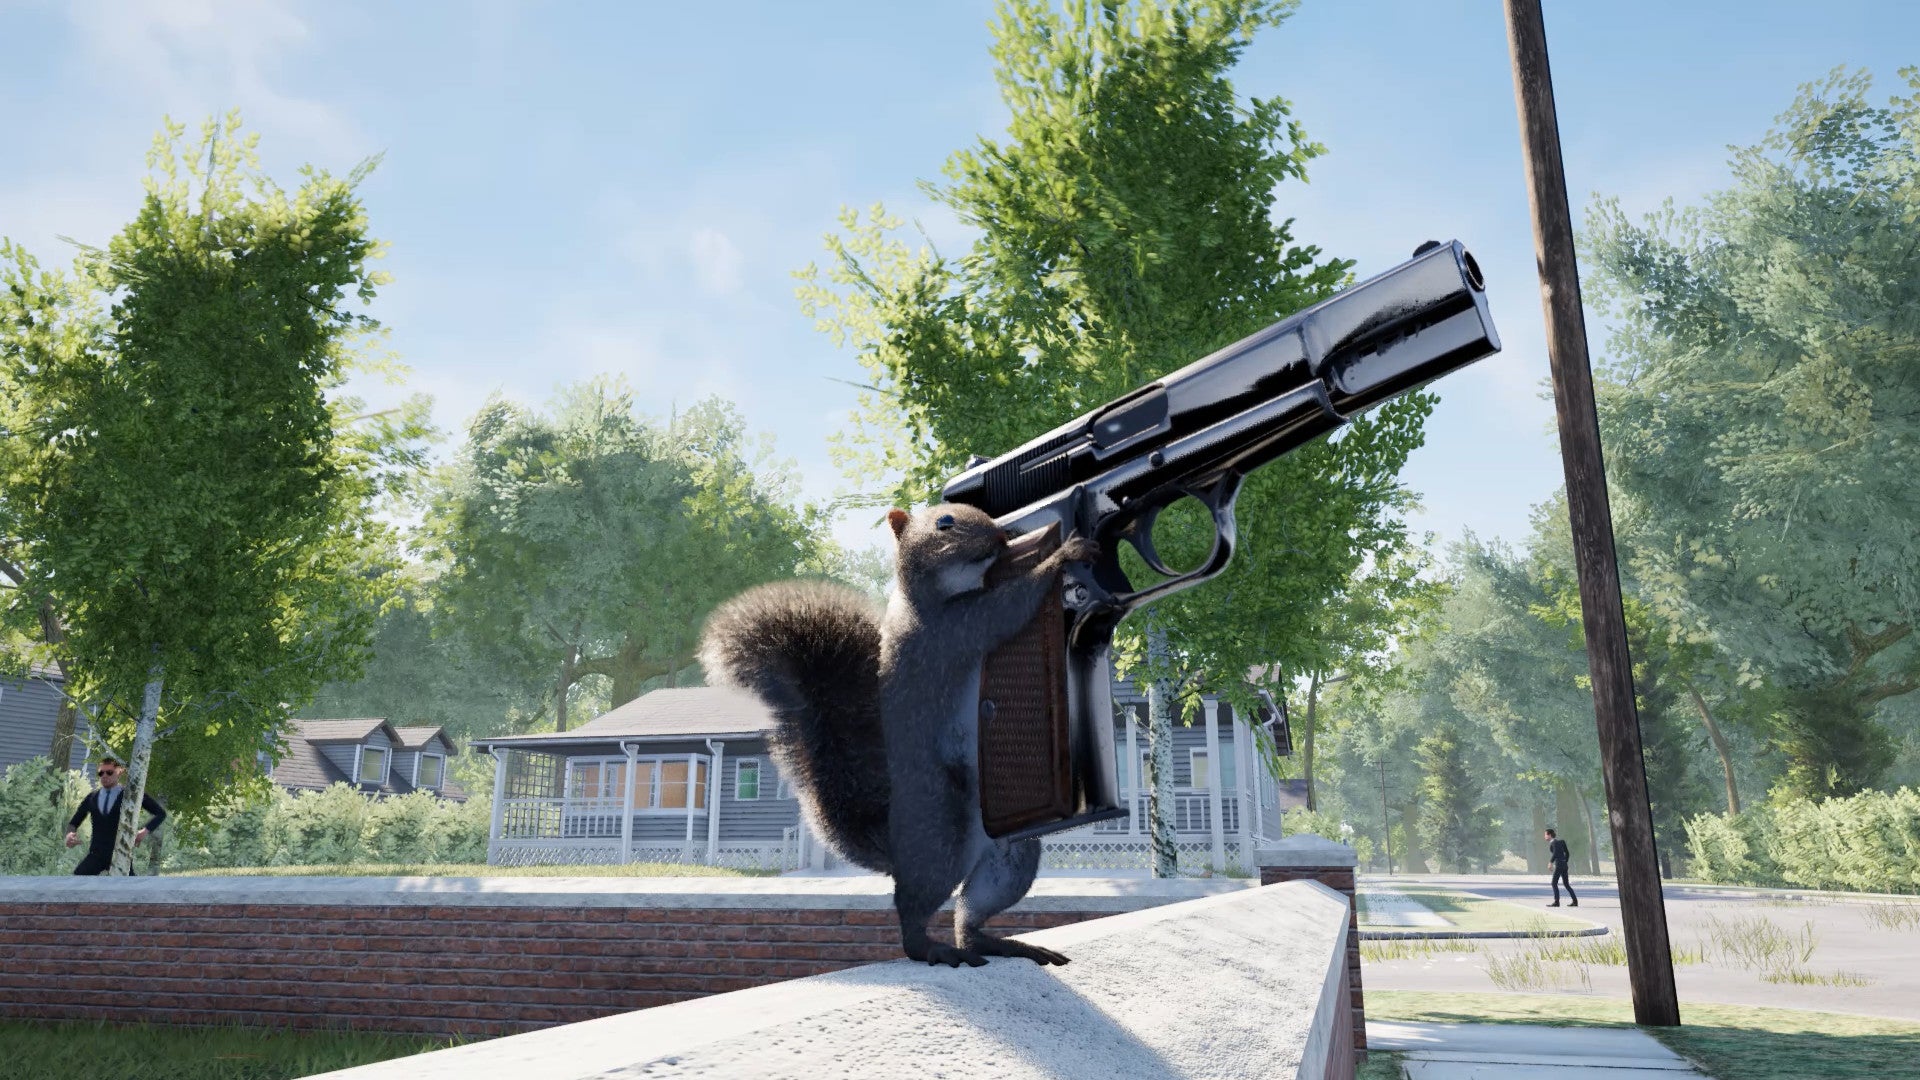 Squirrel with a gun from Squirrel with a Gun.